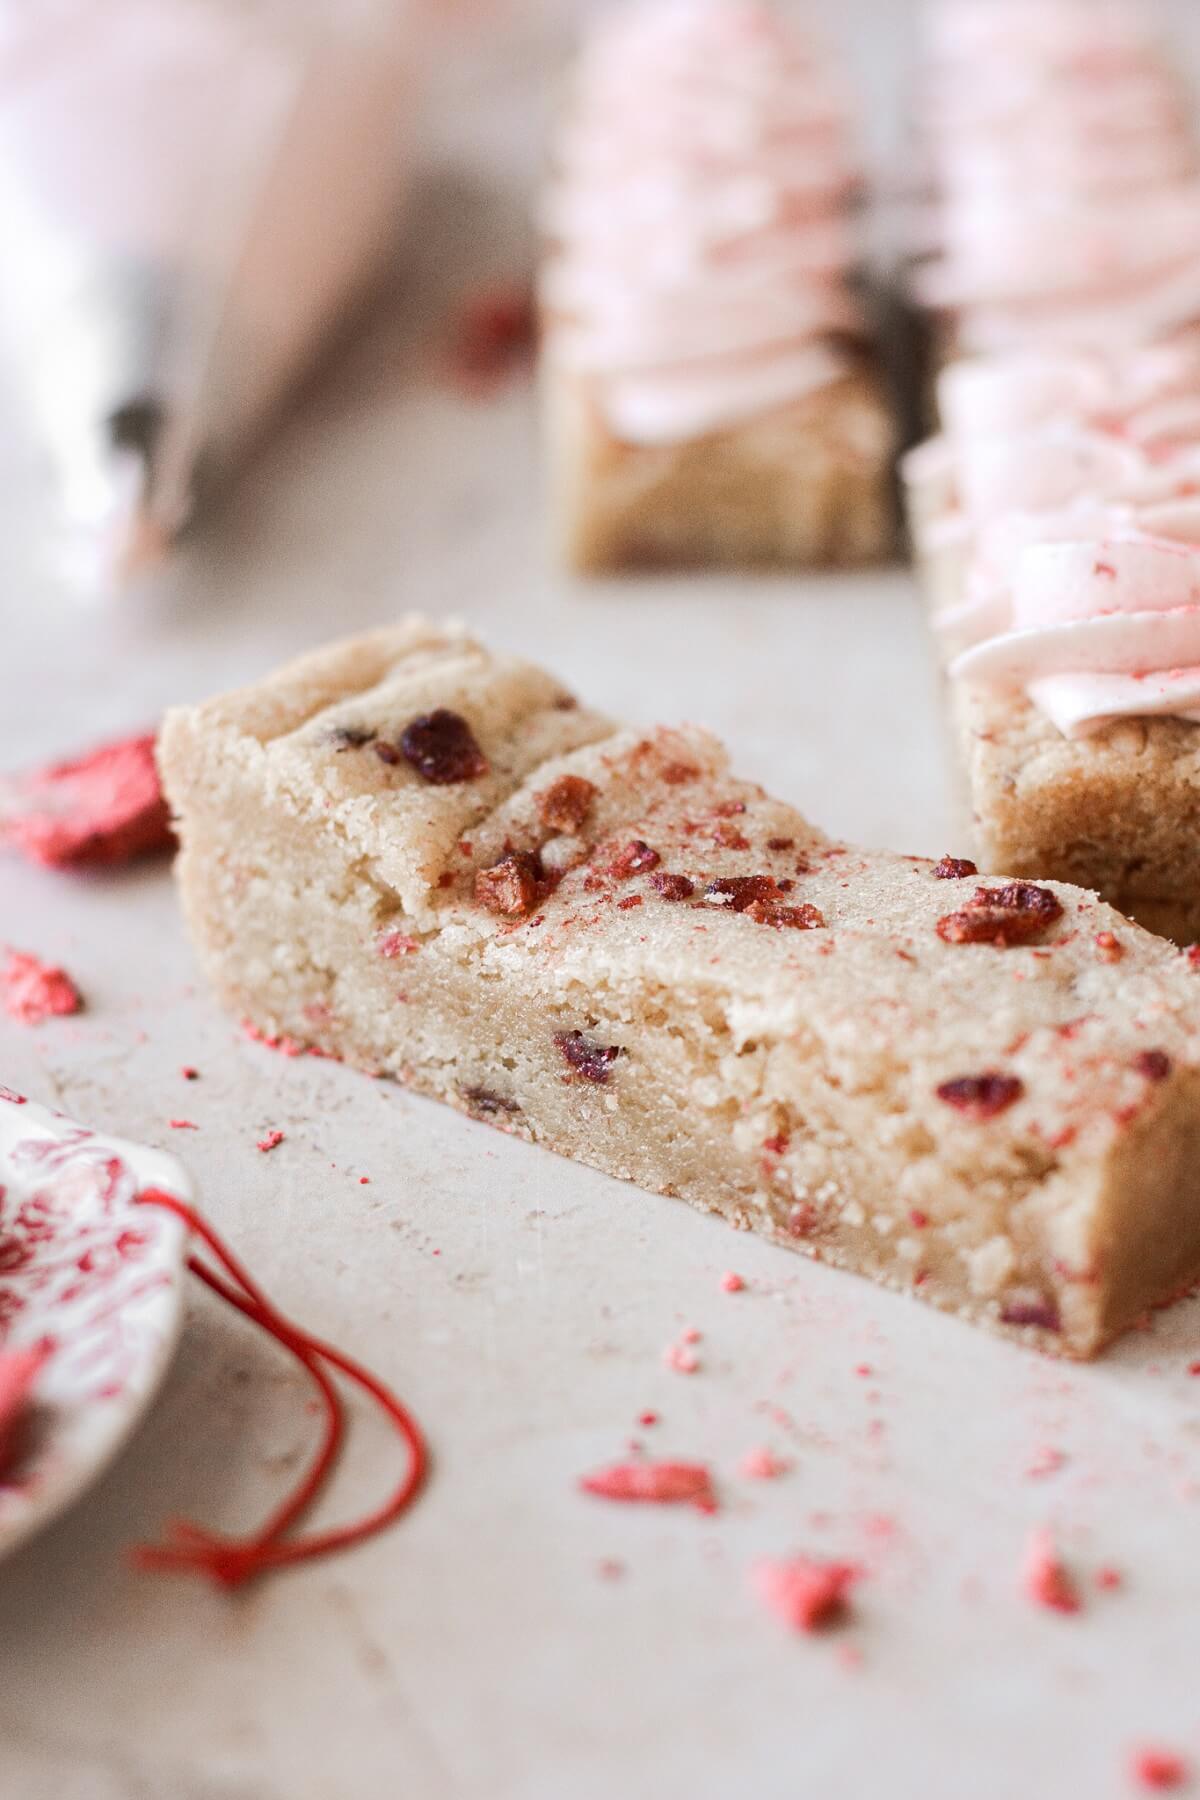 A strawberry blondie sprinkled with freeze dried strawberries.